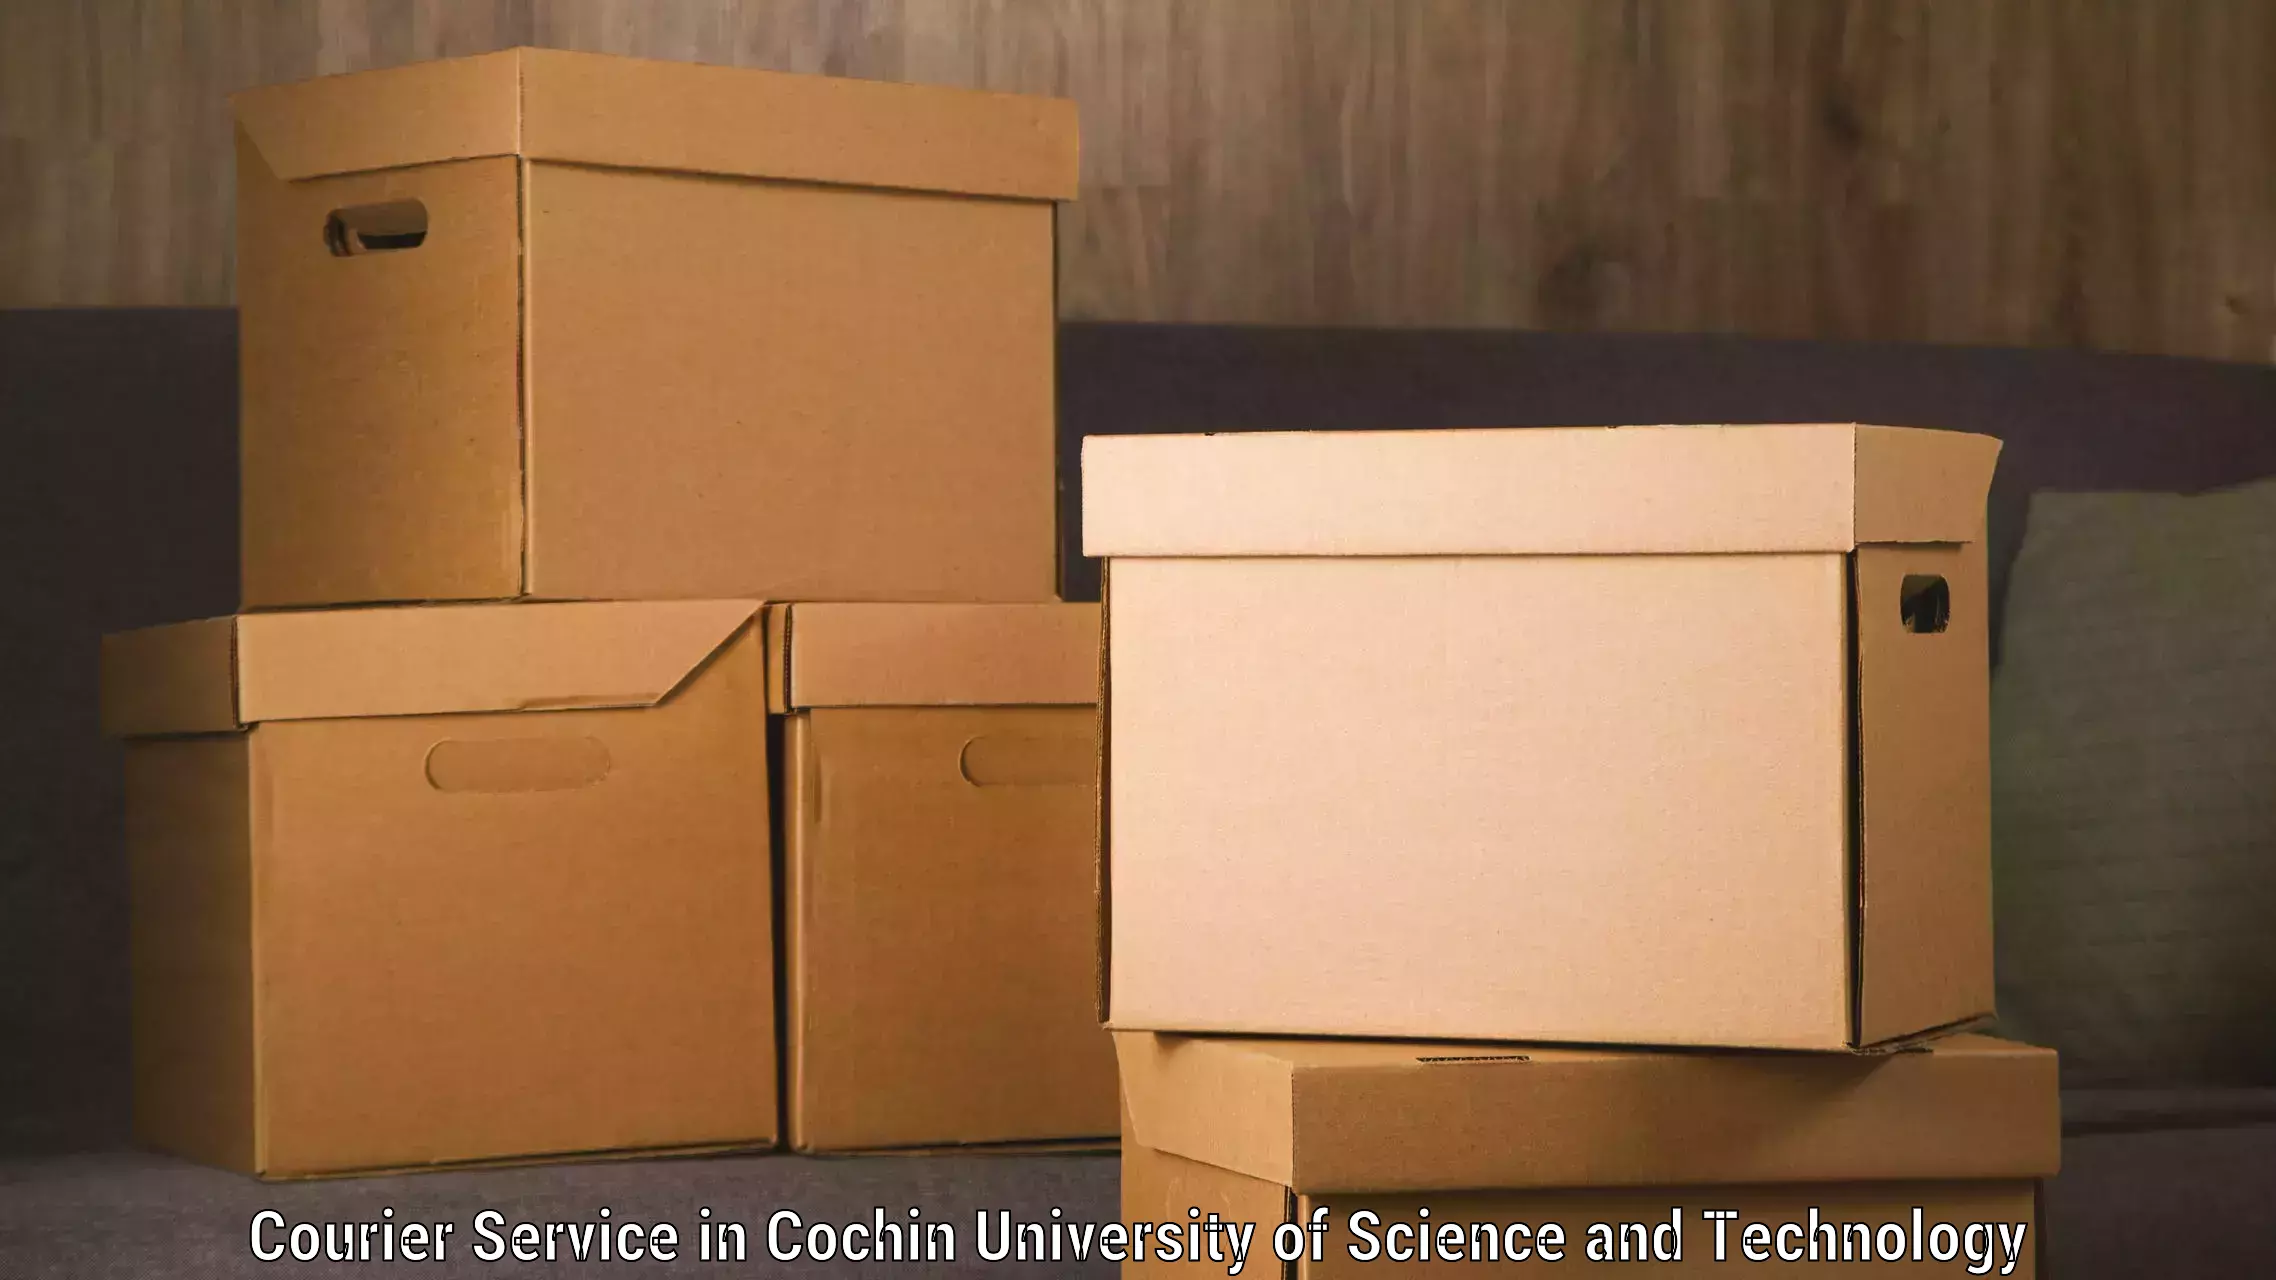 Punctual parcel services in Cochin University of Science and Technology